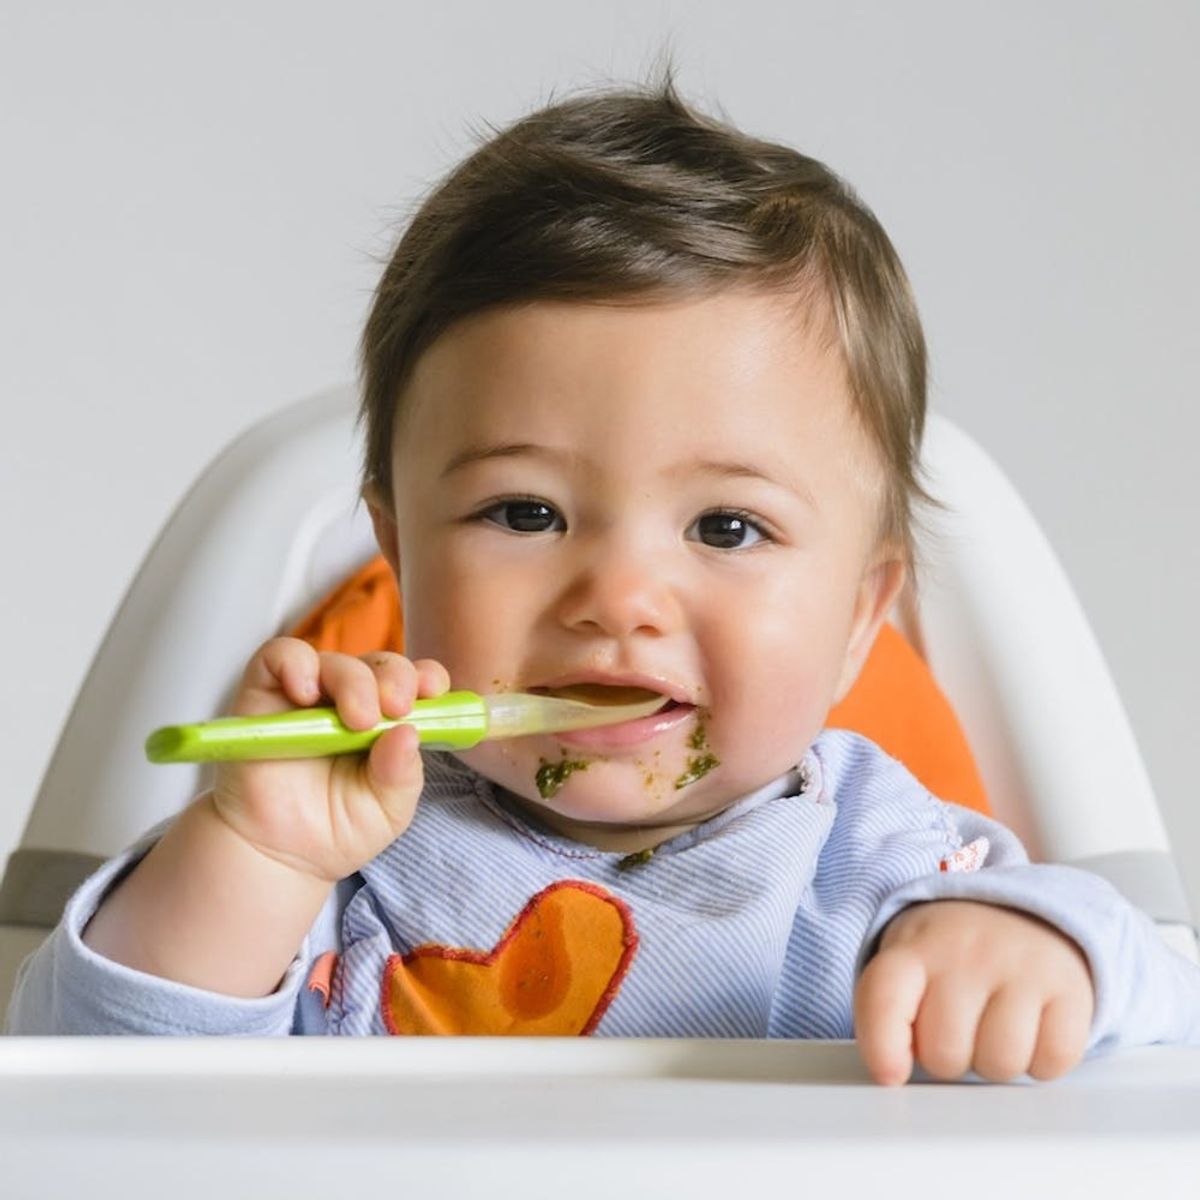 7 Time-Saving Tools That Help You Switch Your Baby to Solid Food